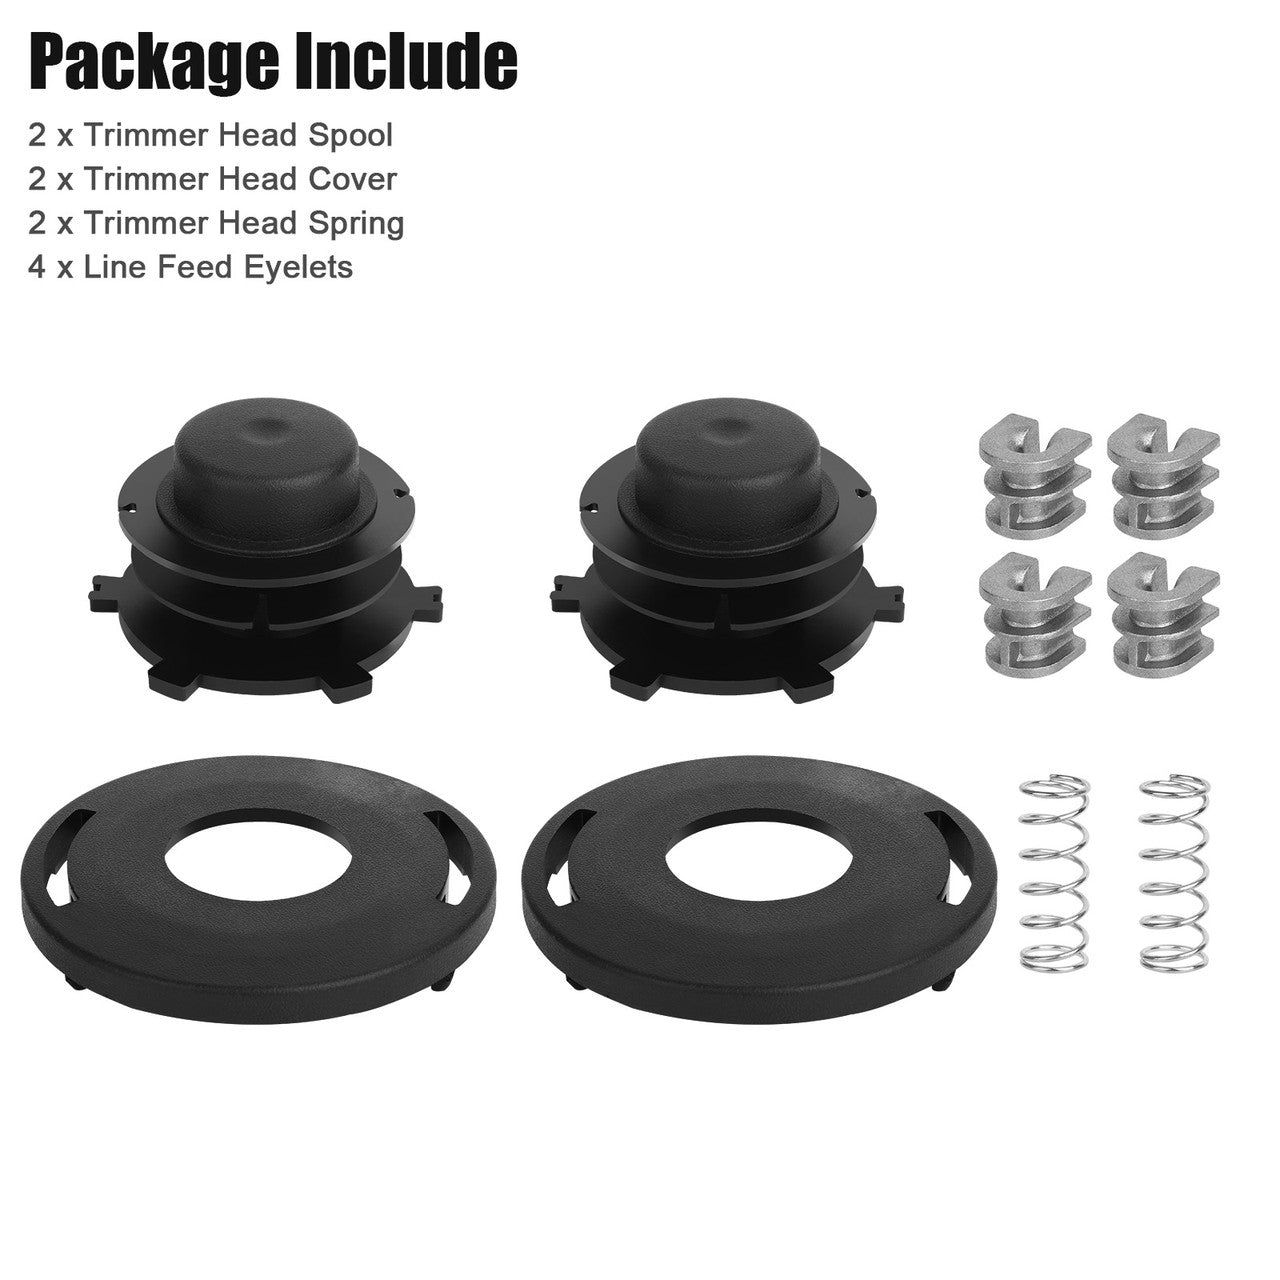 Trimmer Head Rebuild Kit For Stihl 25-2, 25-2 Bump Feed Trimmer Head for Stihl Weedeater FS55 FS55R FS56 FS56RC FS70 FS70R FS80 FS85 FS90 FS91R FS94R